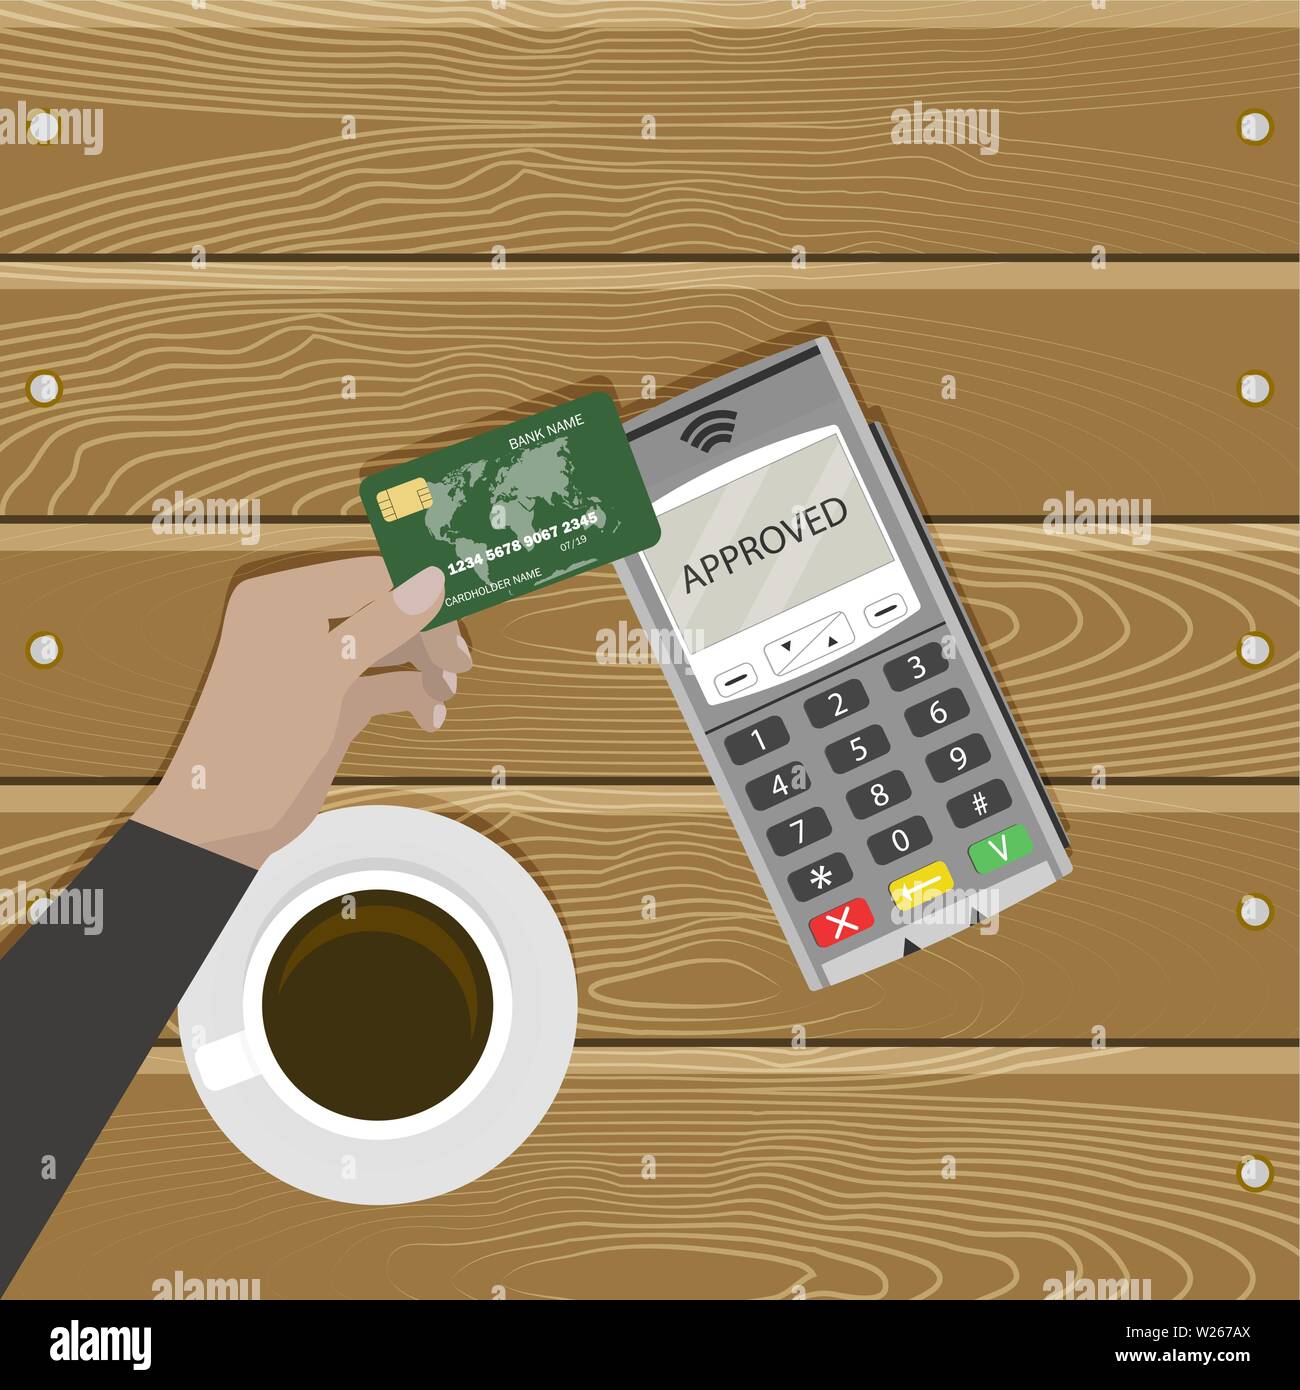 Modern kind pay card without contact. Vector terminal get verification card when passing payment illustration Stock Vector